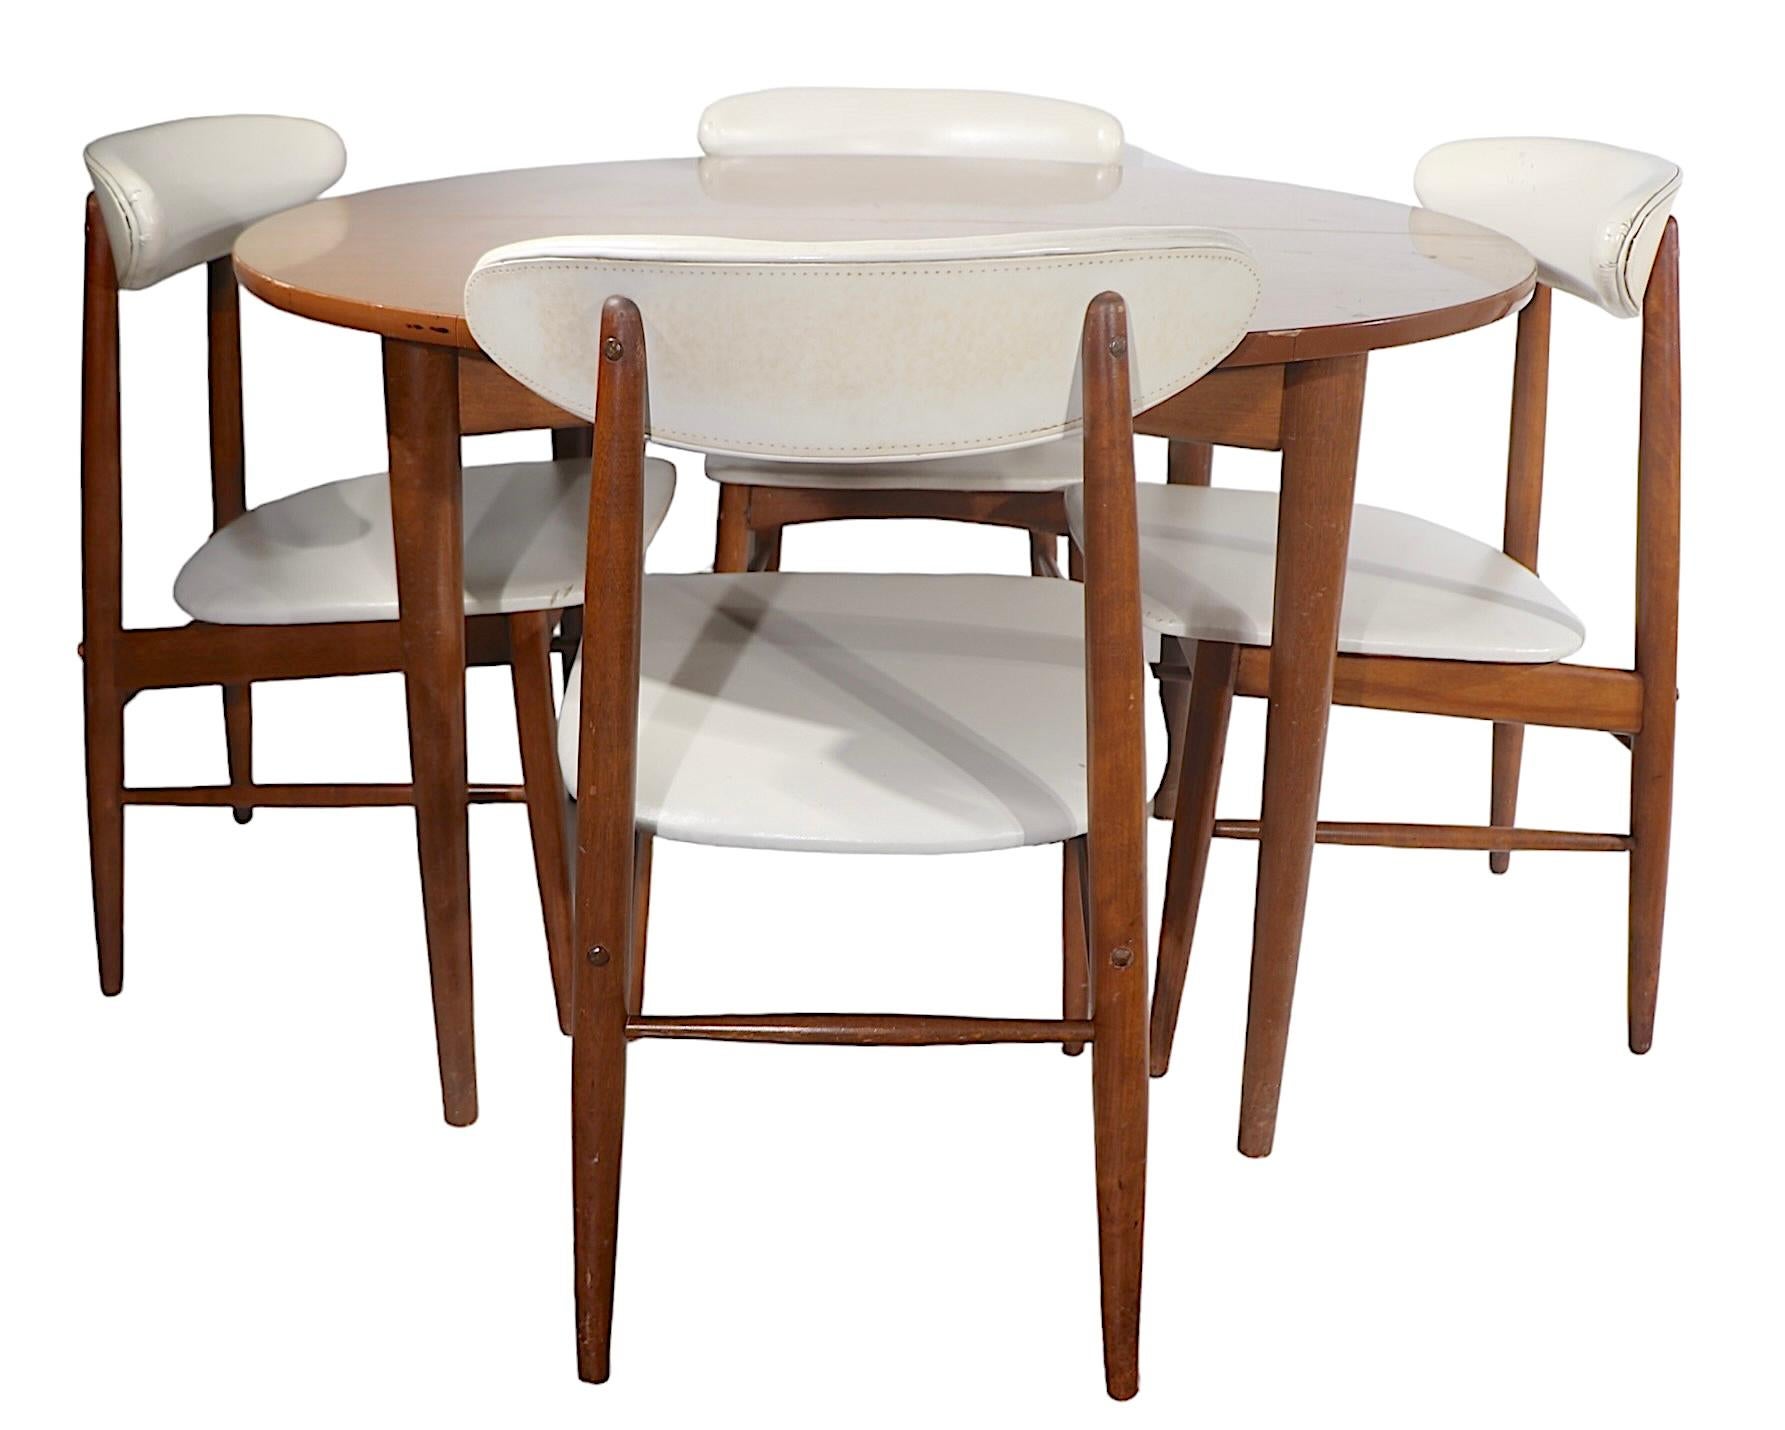 5 pc Mid Century Dinette Set by Viko Baumritter c 1950’s For Sale 1